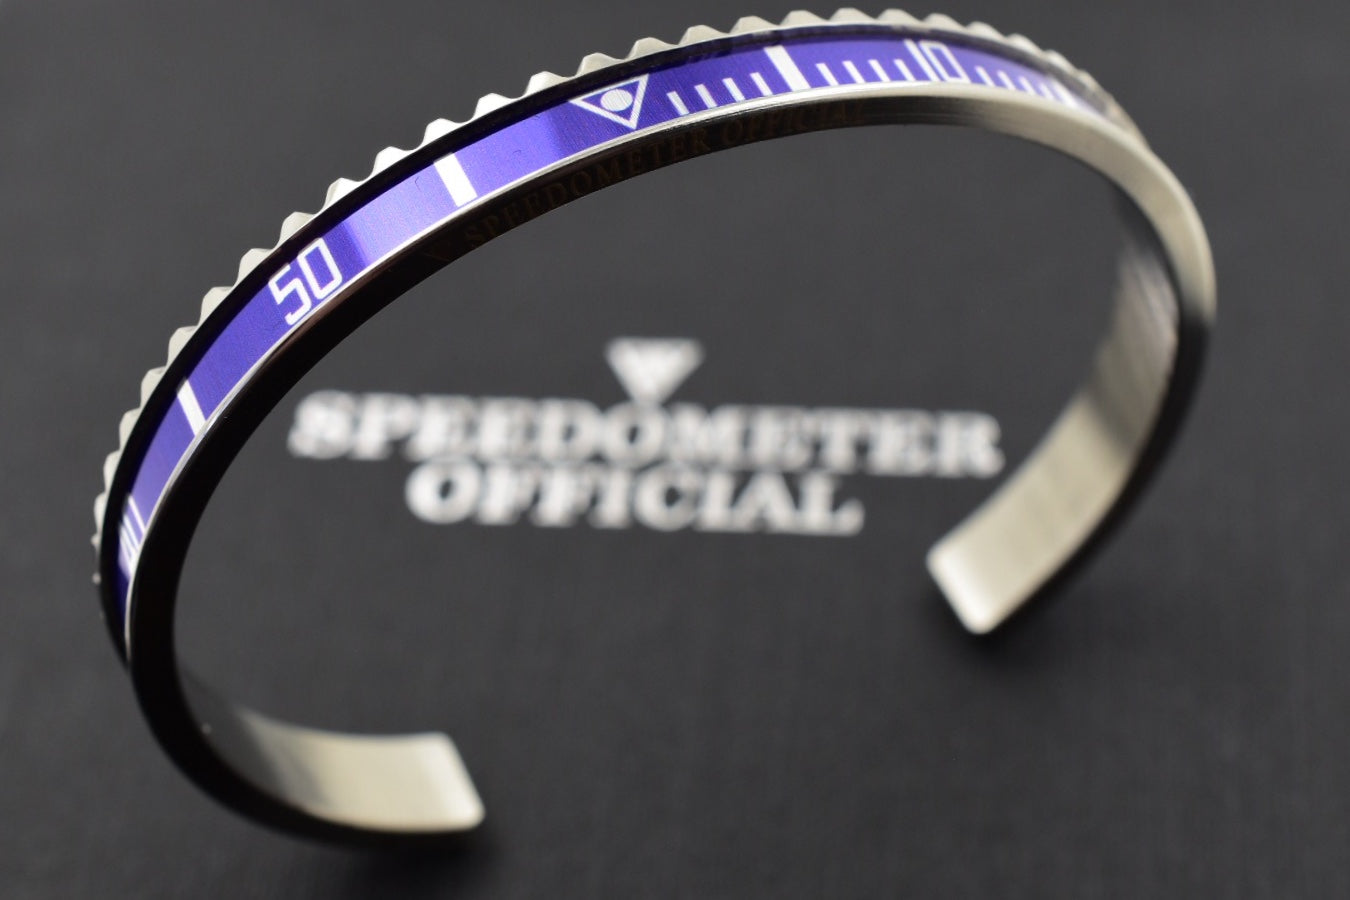 Speedometer Official Silver Steel with Blue Insert Bangle Bracelet-Speedometer Official-Truphae